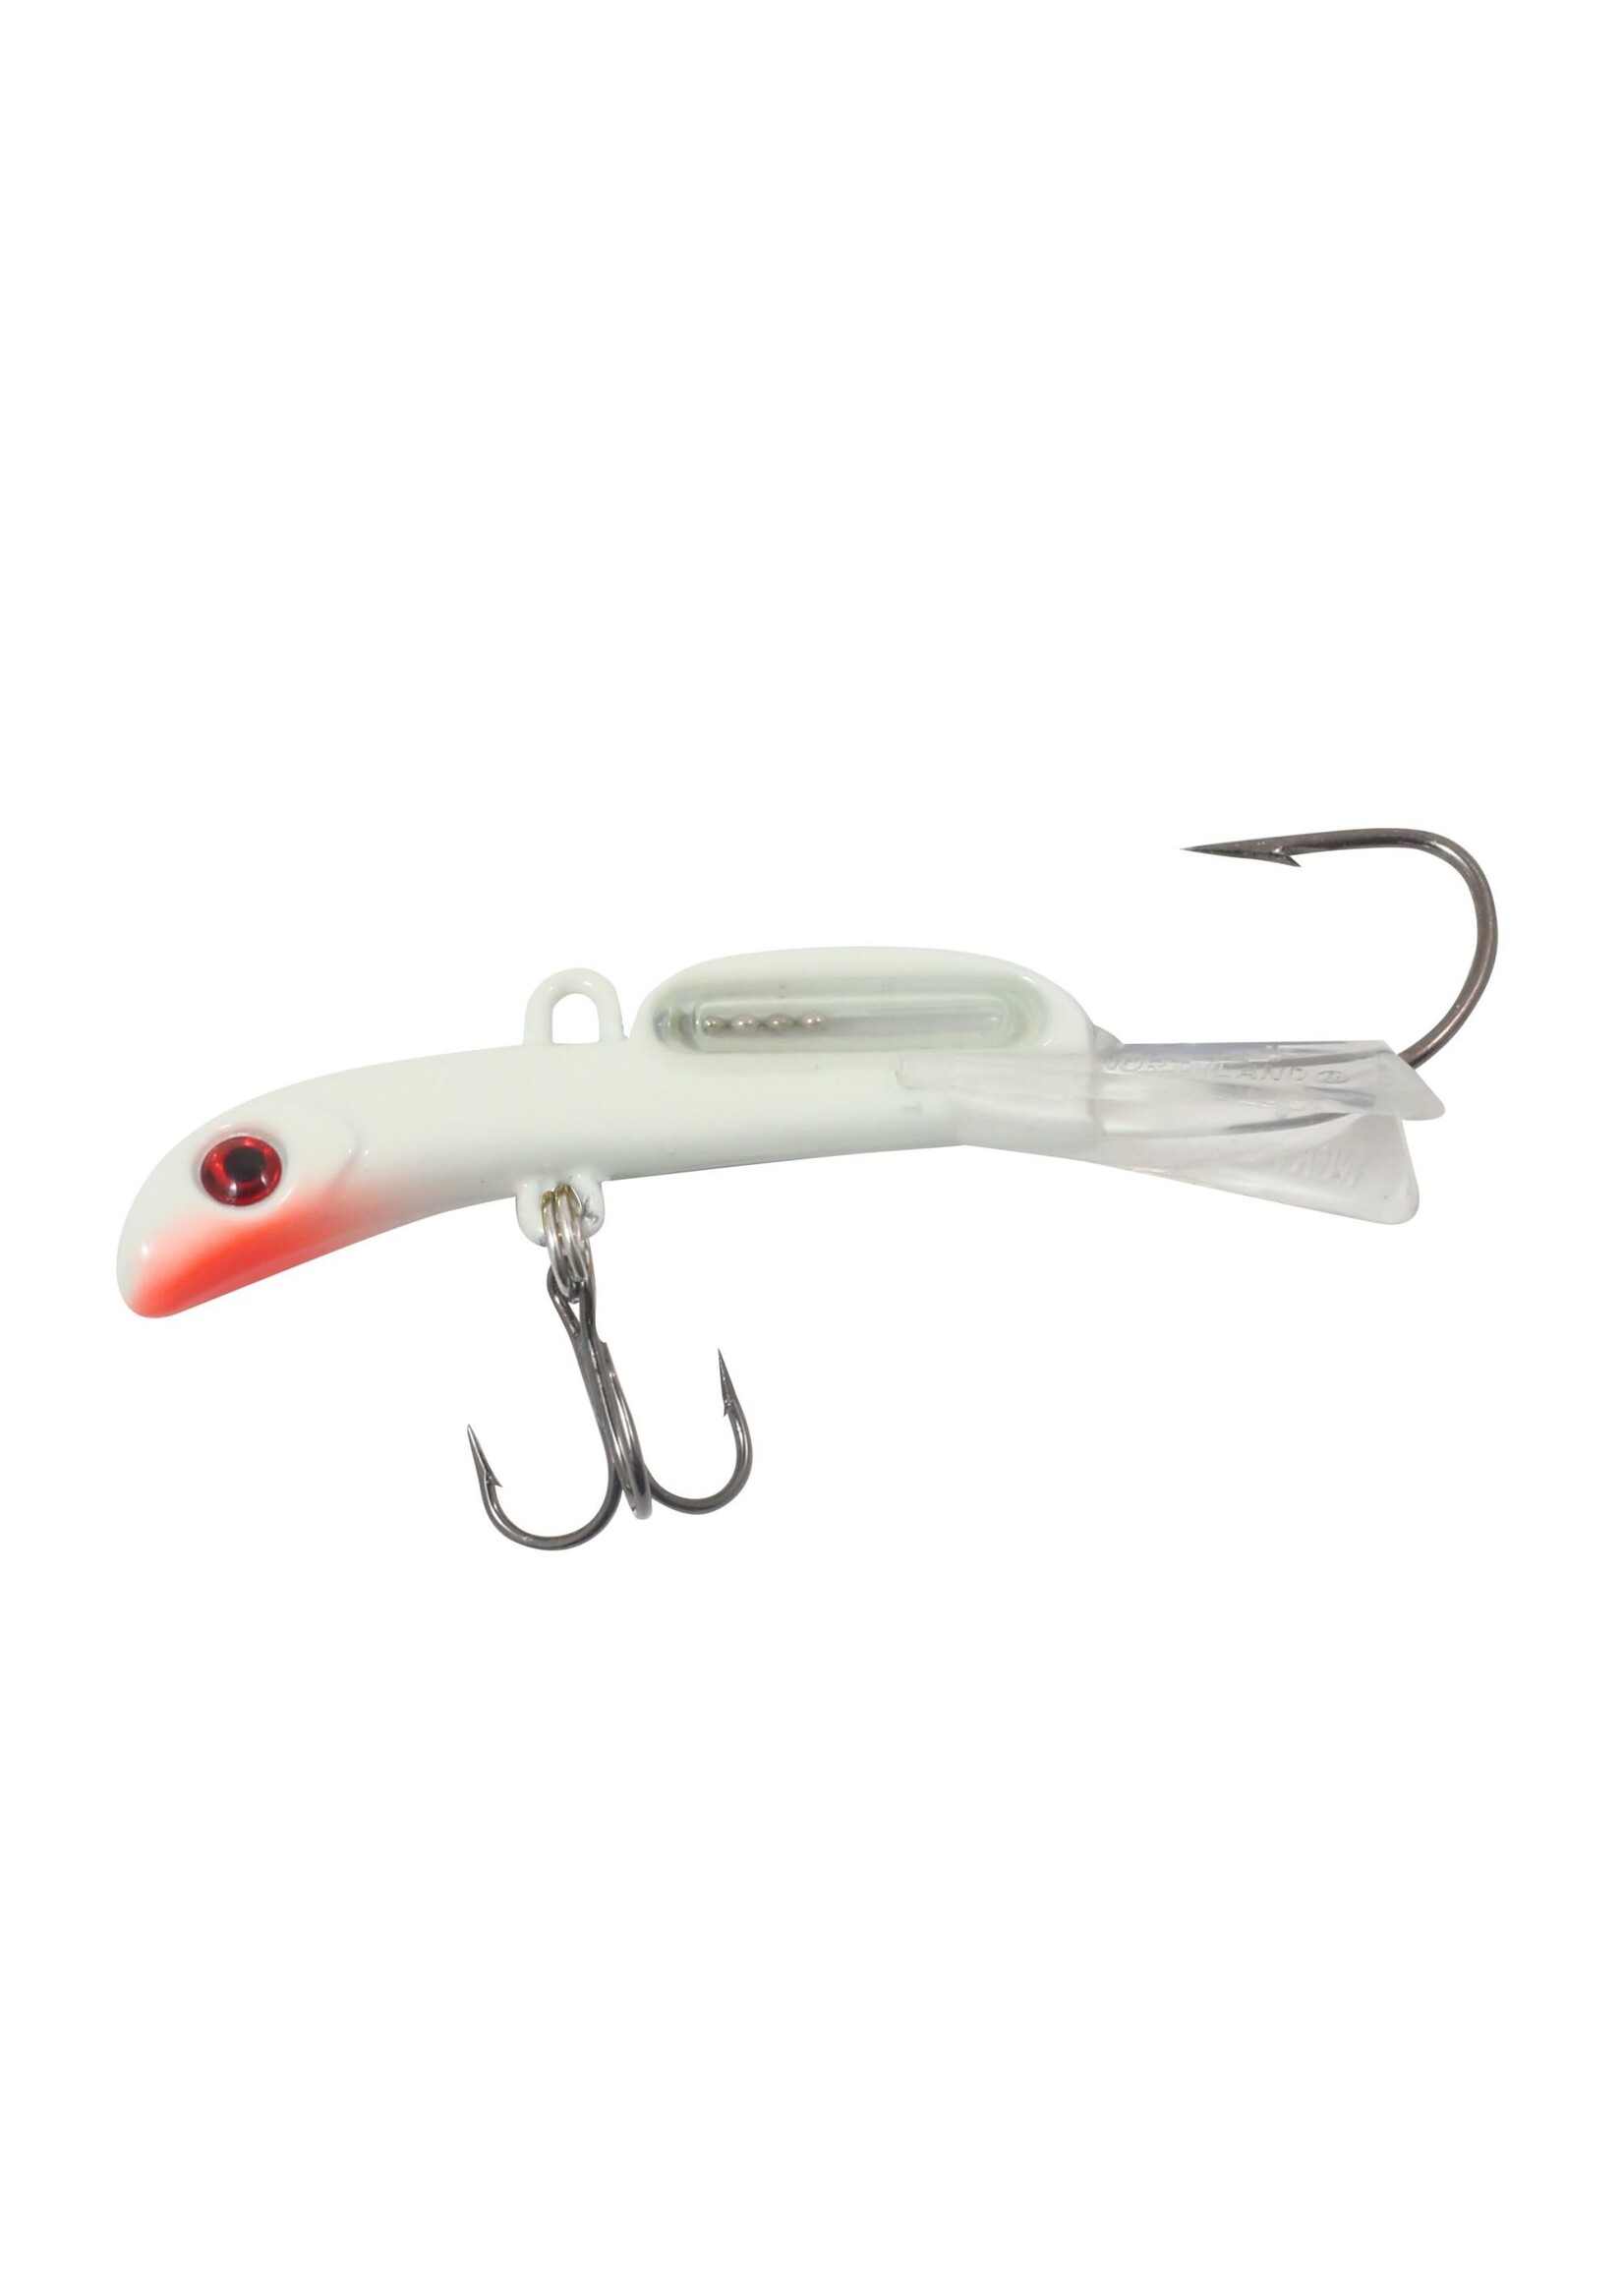 Northland Tackle Rattlin Puppet Minnow 1/4 oz - Gold Shiner